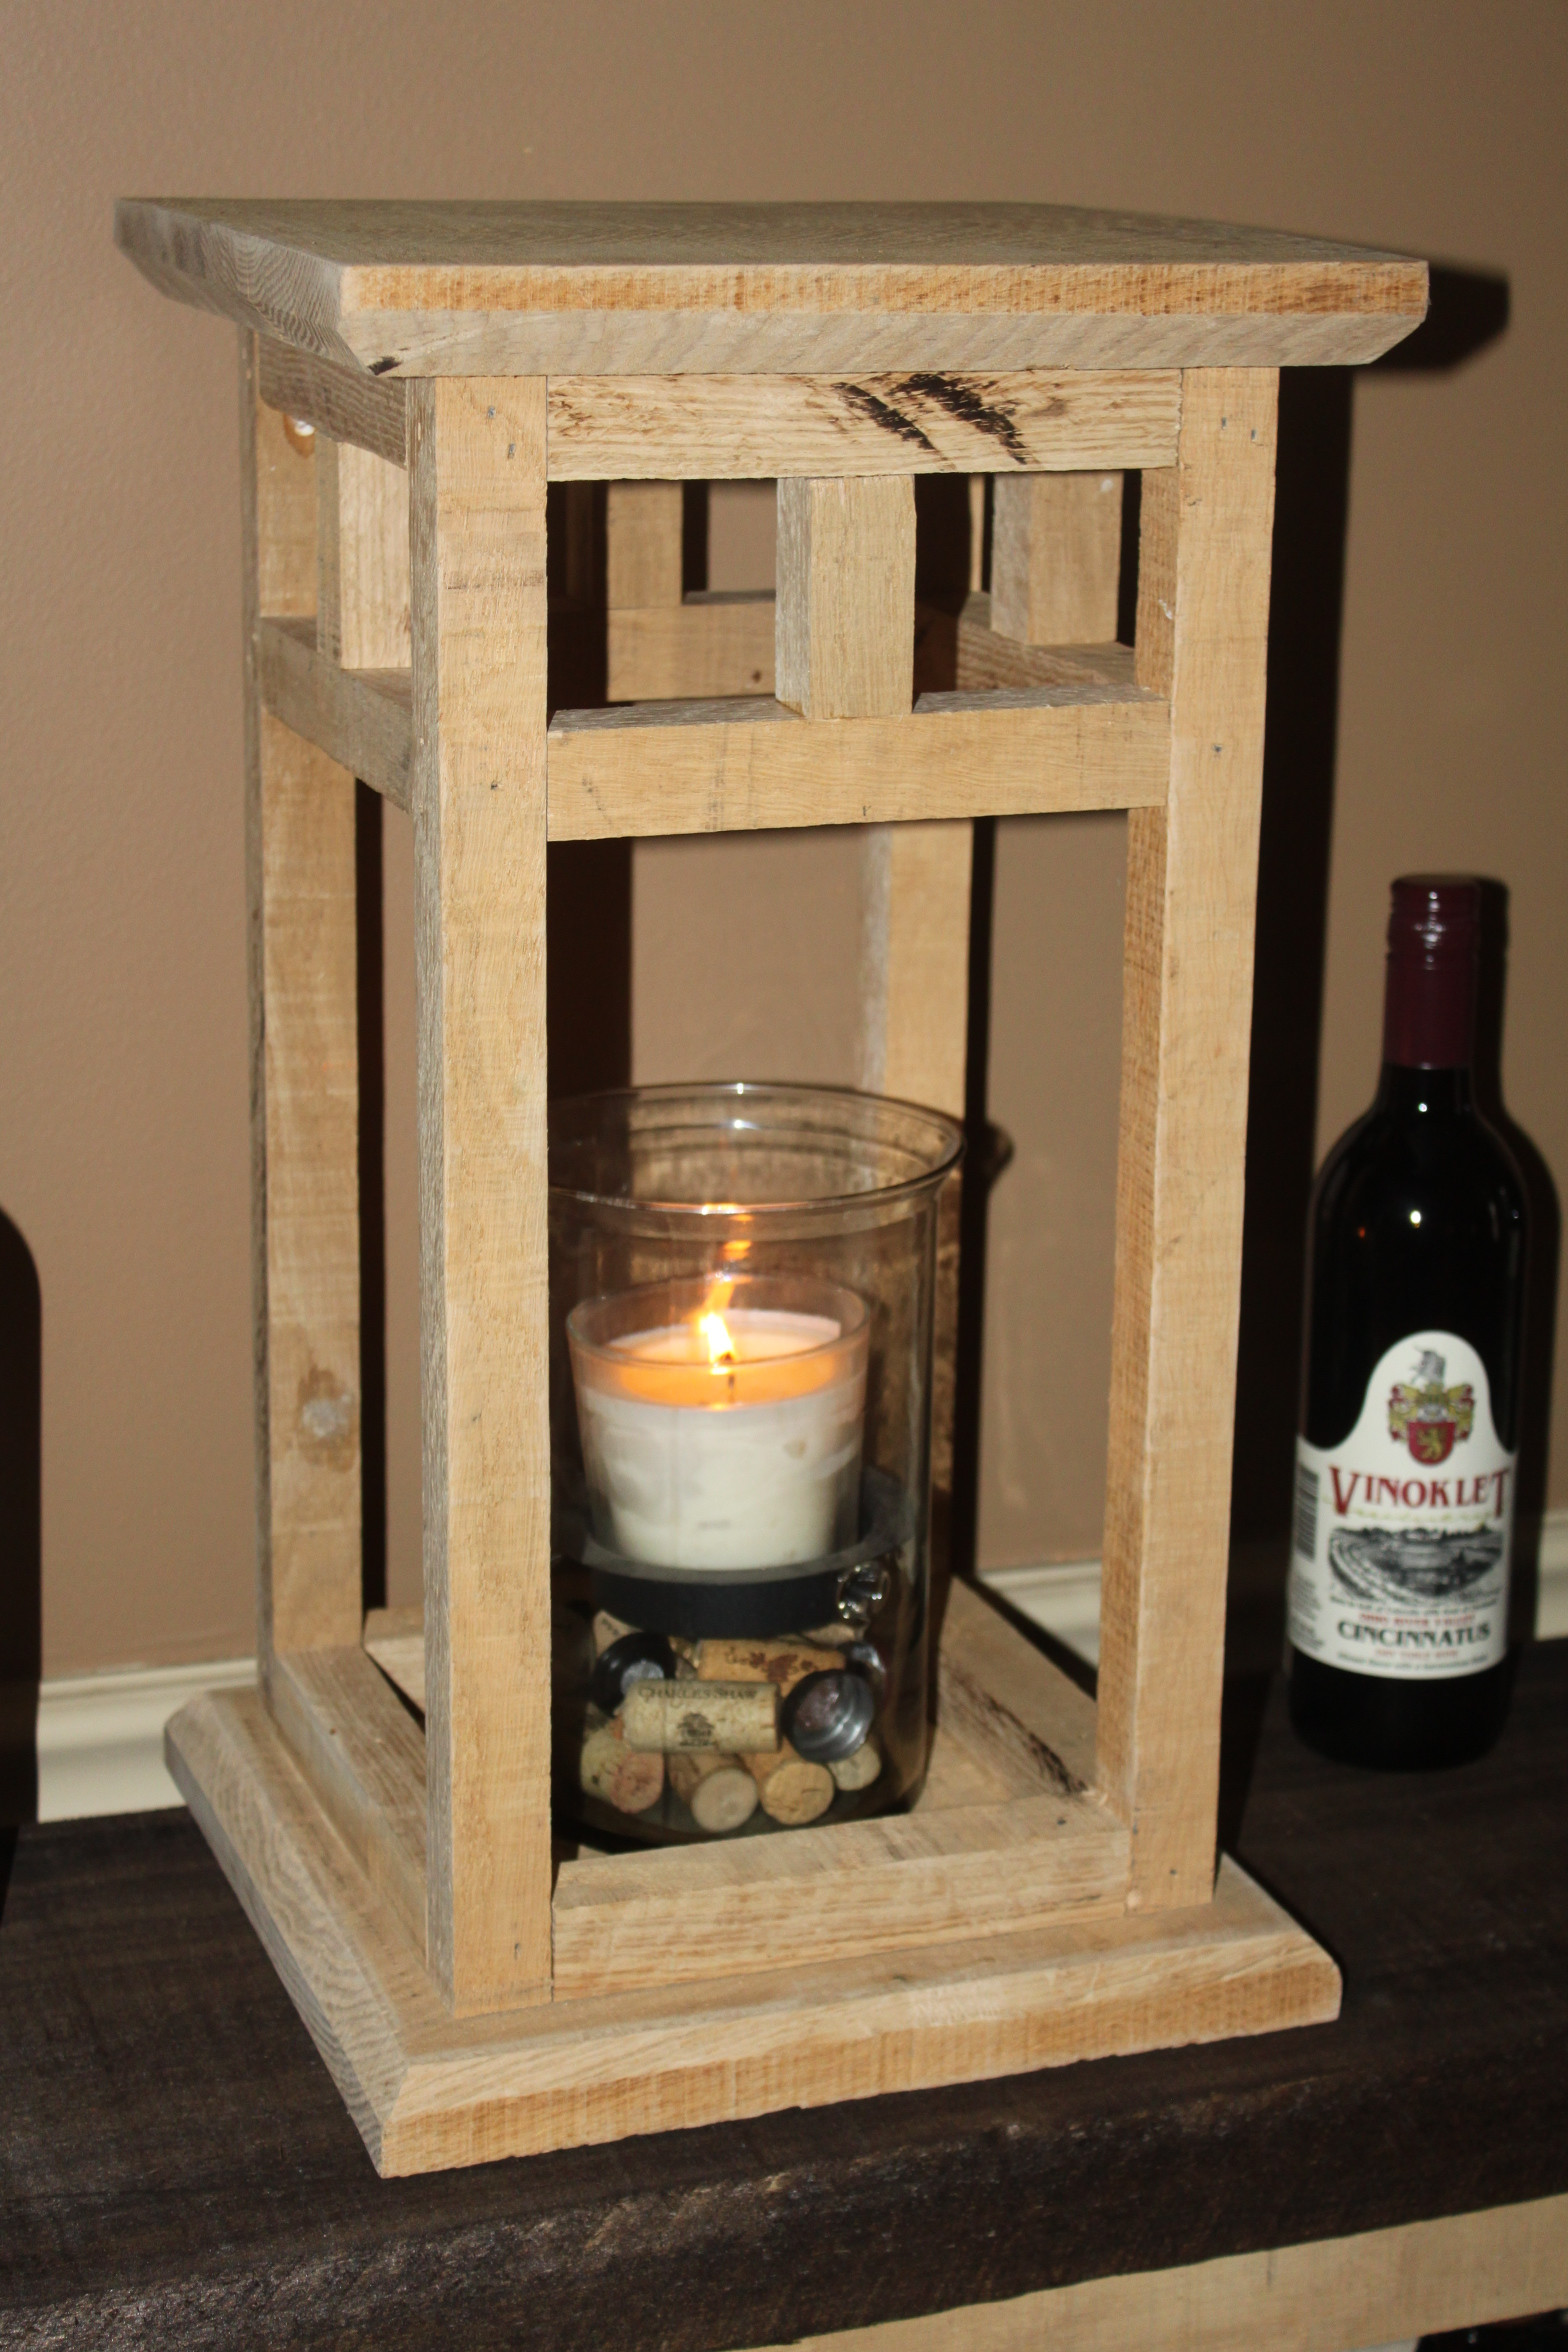 DIY Woodworking Christmas Gifts
 4 DIY Holiday Gifts You Can Make Free From Pallets